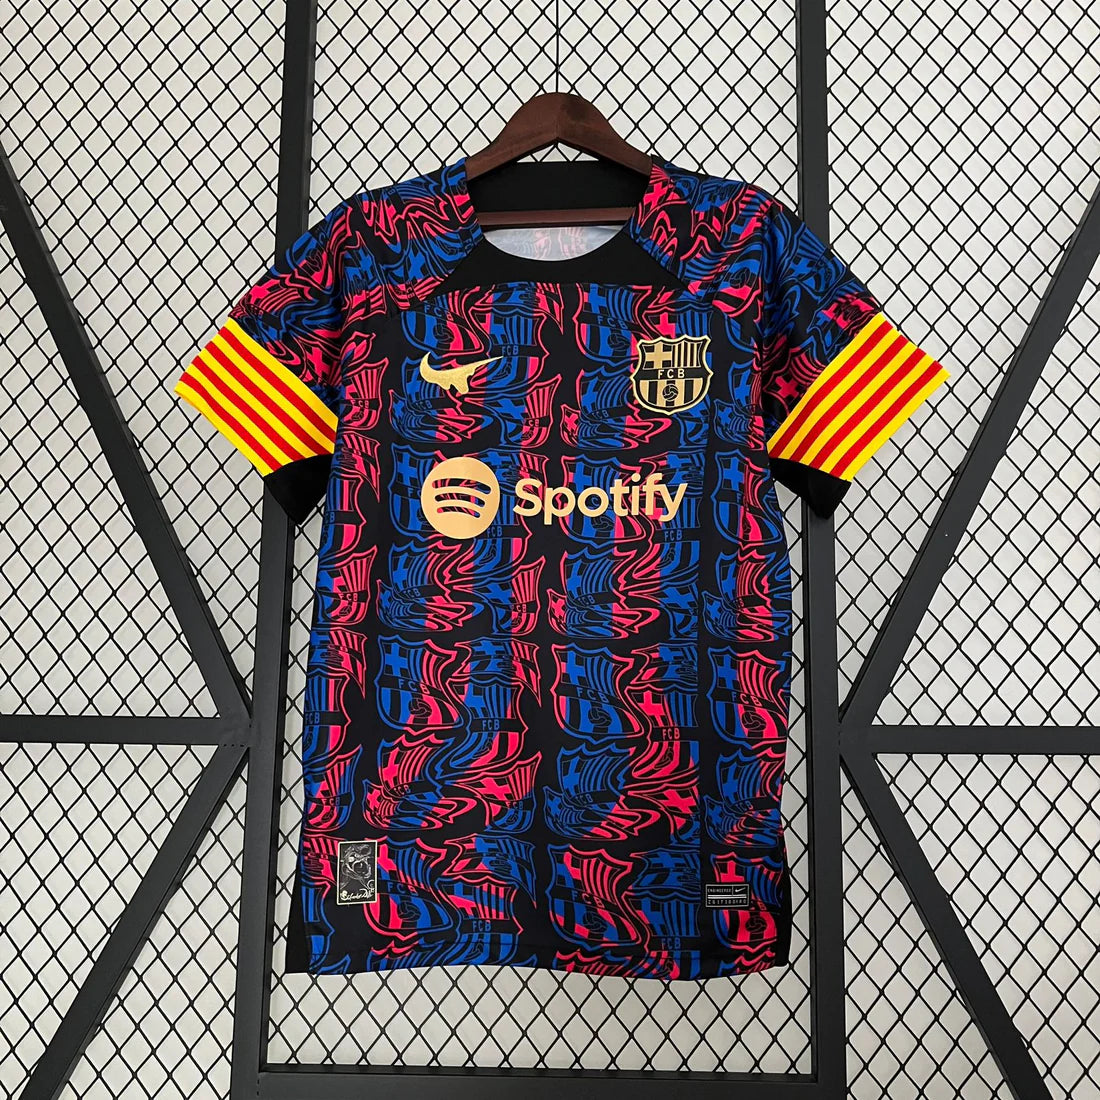 FC Barcelona special